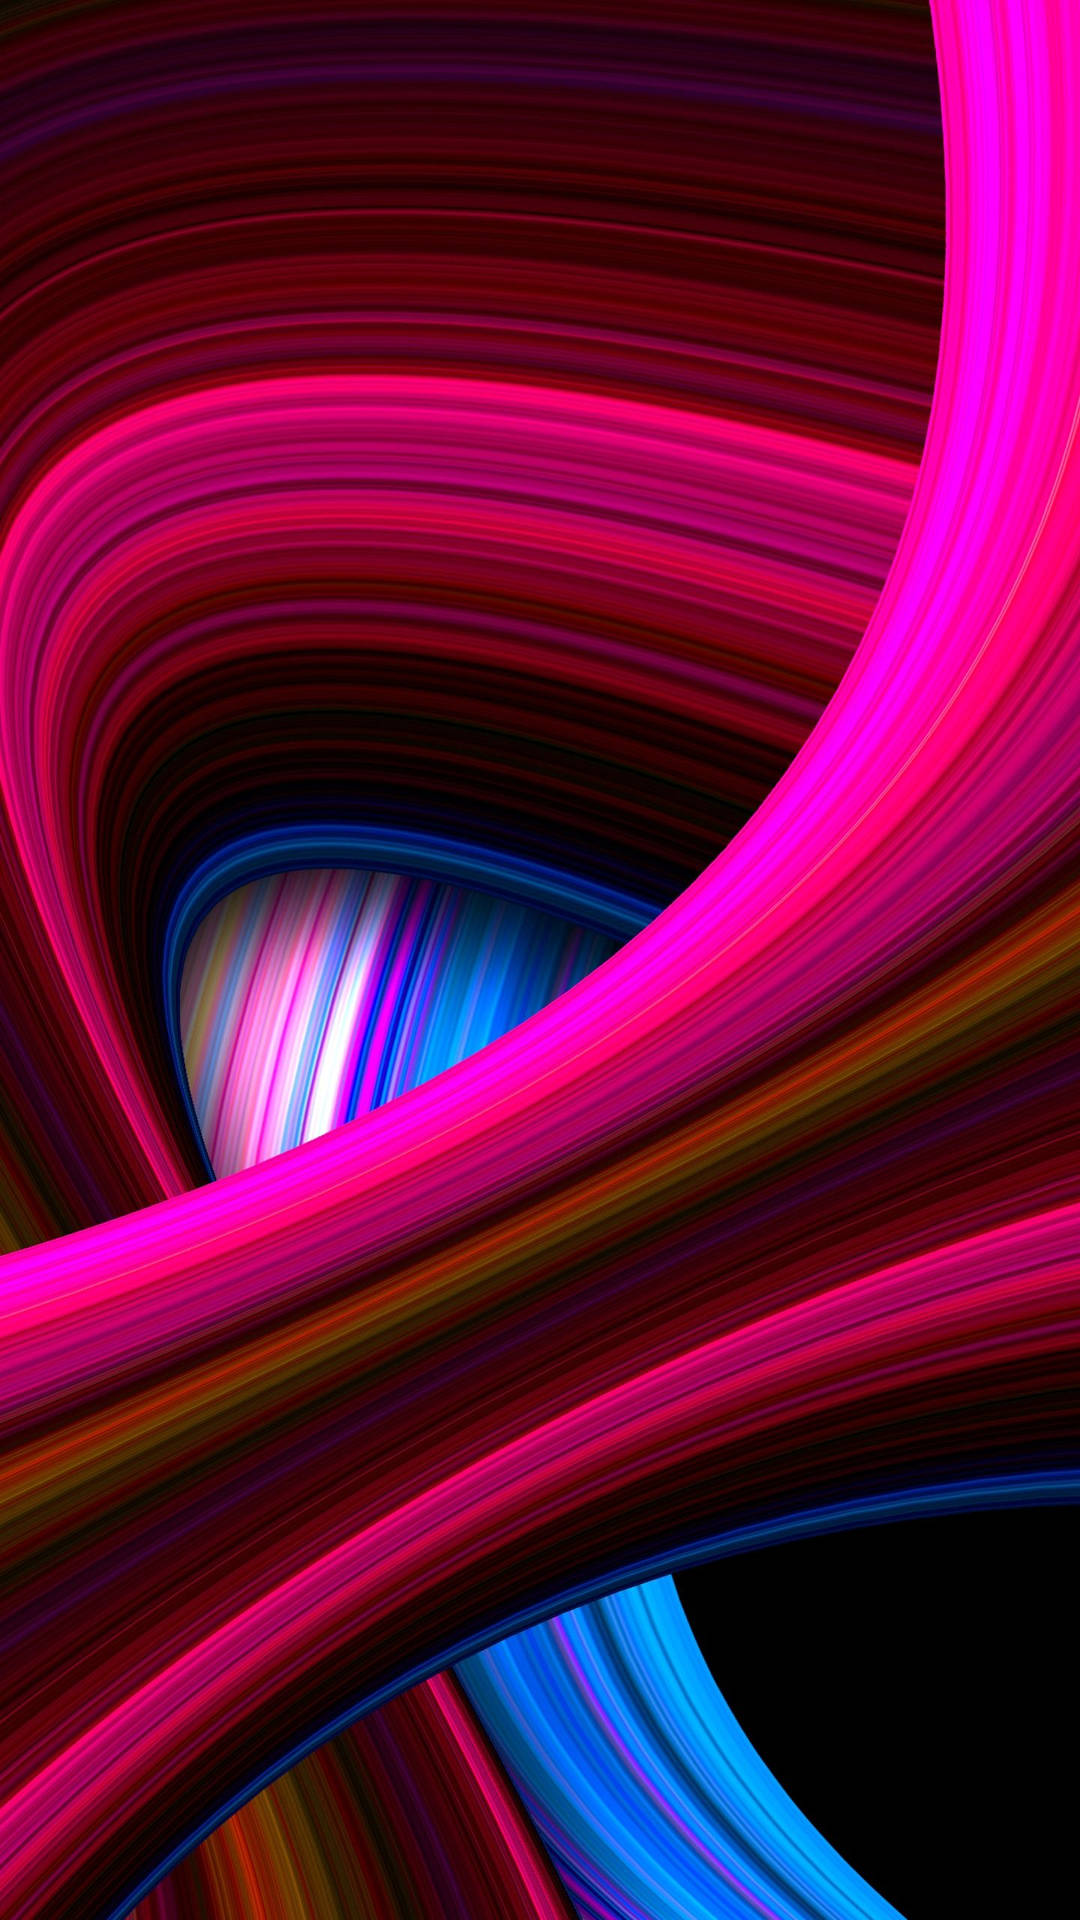 Samsung Galaxy S20 With Vibrant Waves Wallpaper